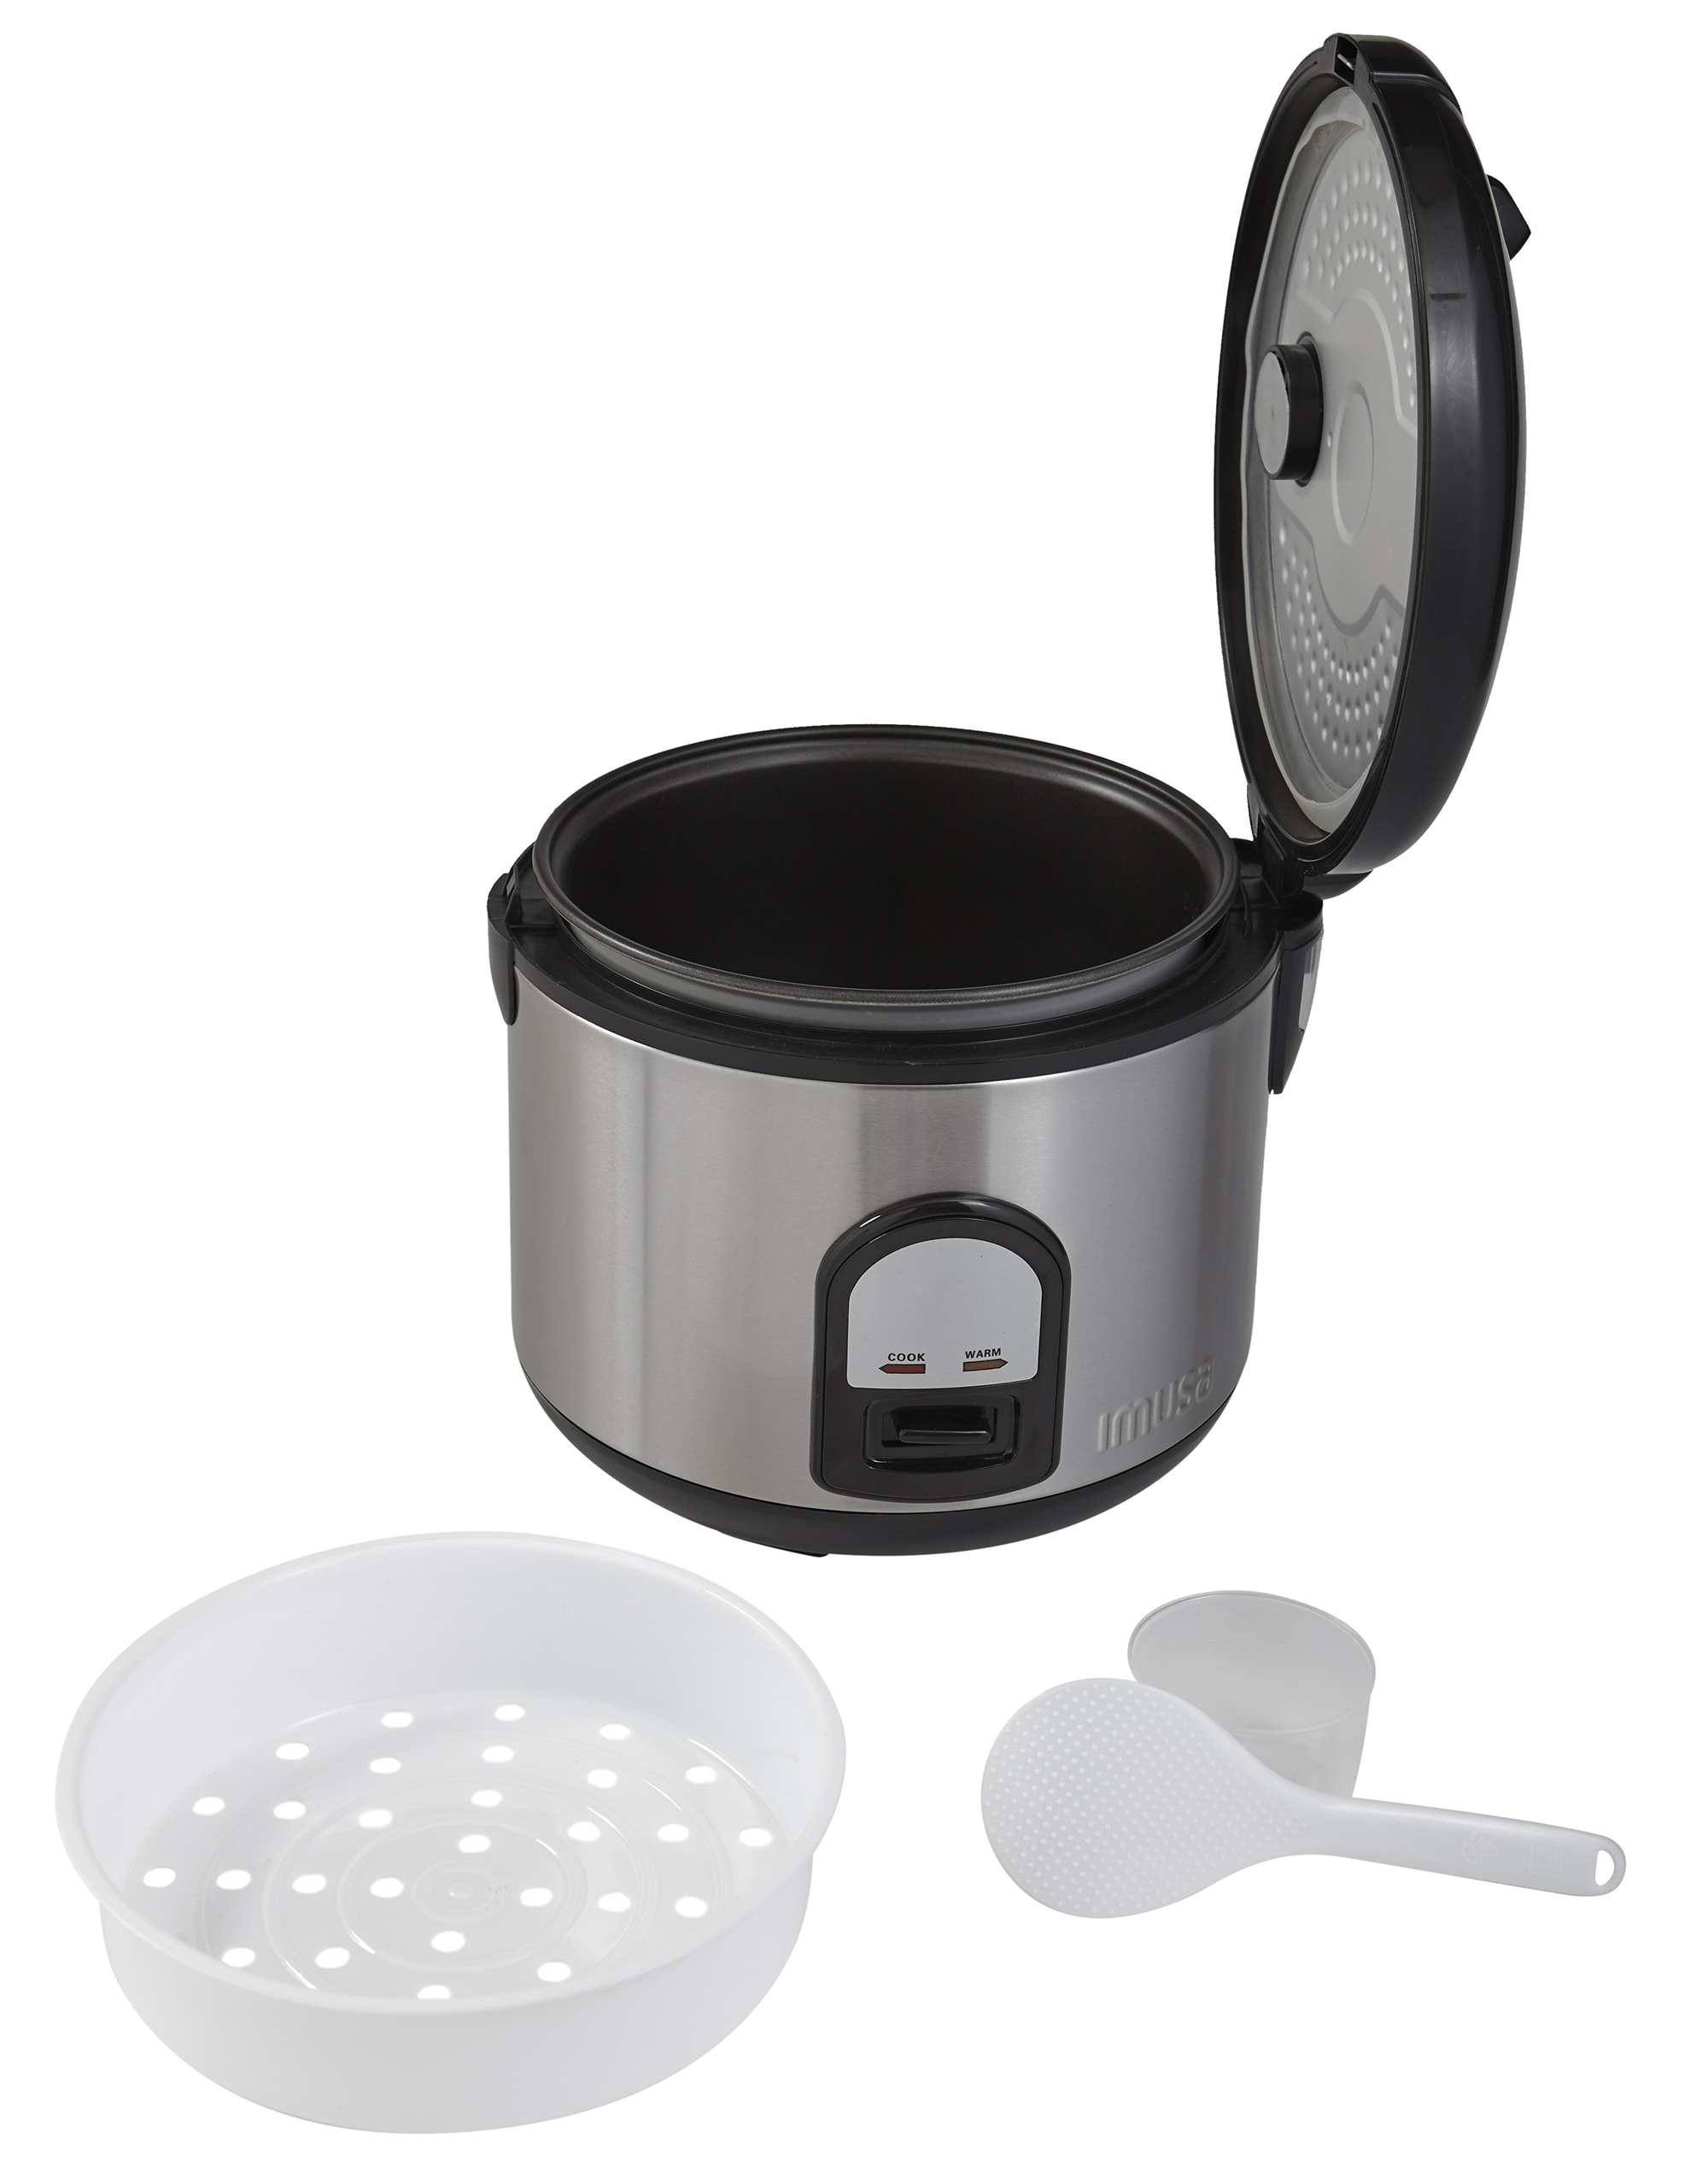 IMUSA IMUSA Electric Stainless Steel PTFE Nonstick Deluxe Rice